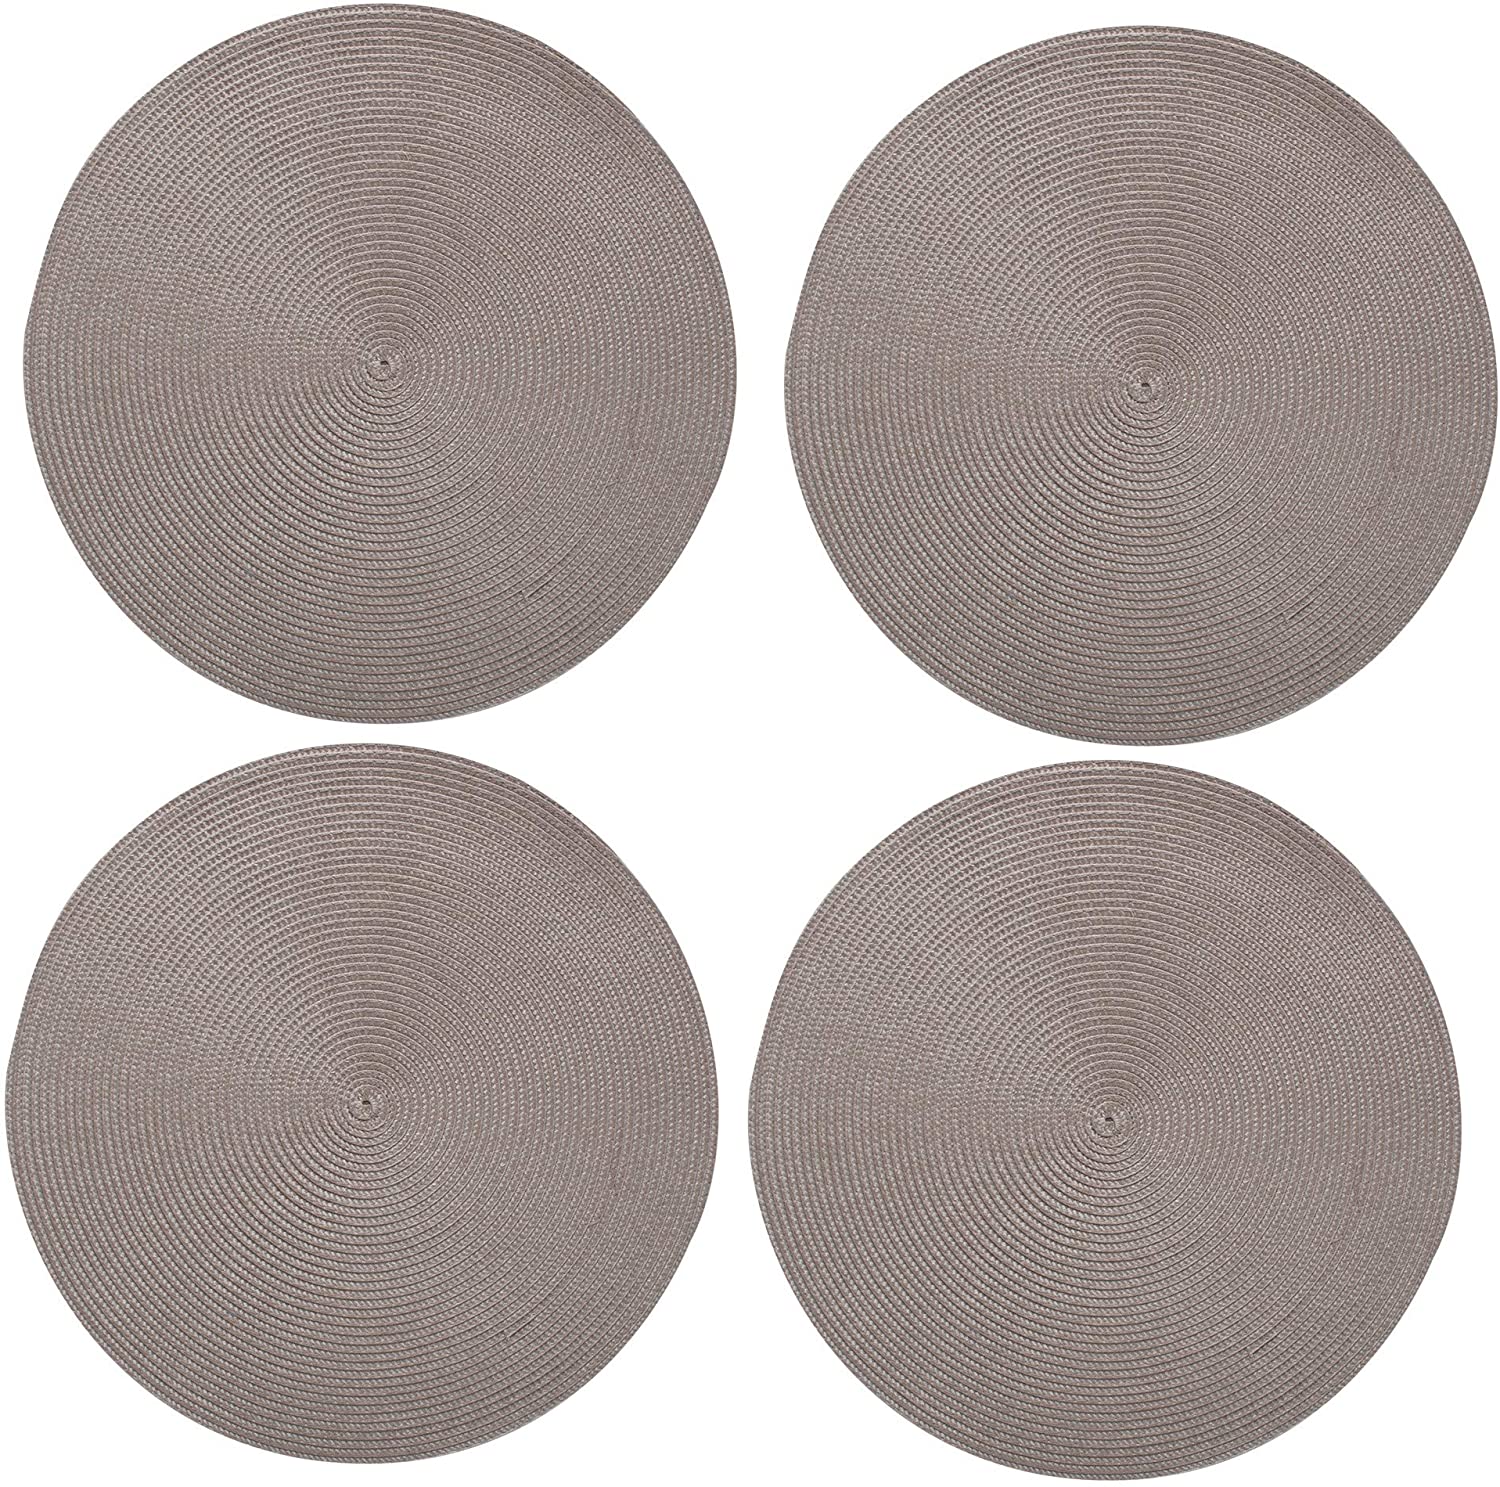 62394 ROUND GRAY PLACEMAT 36 CM.